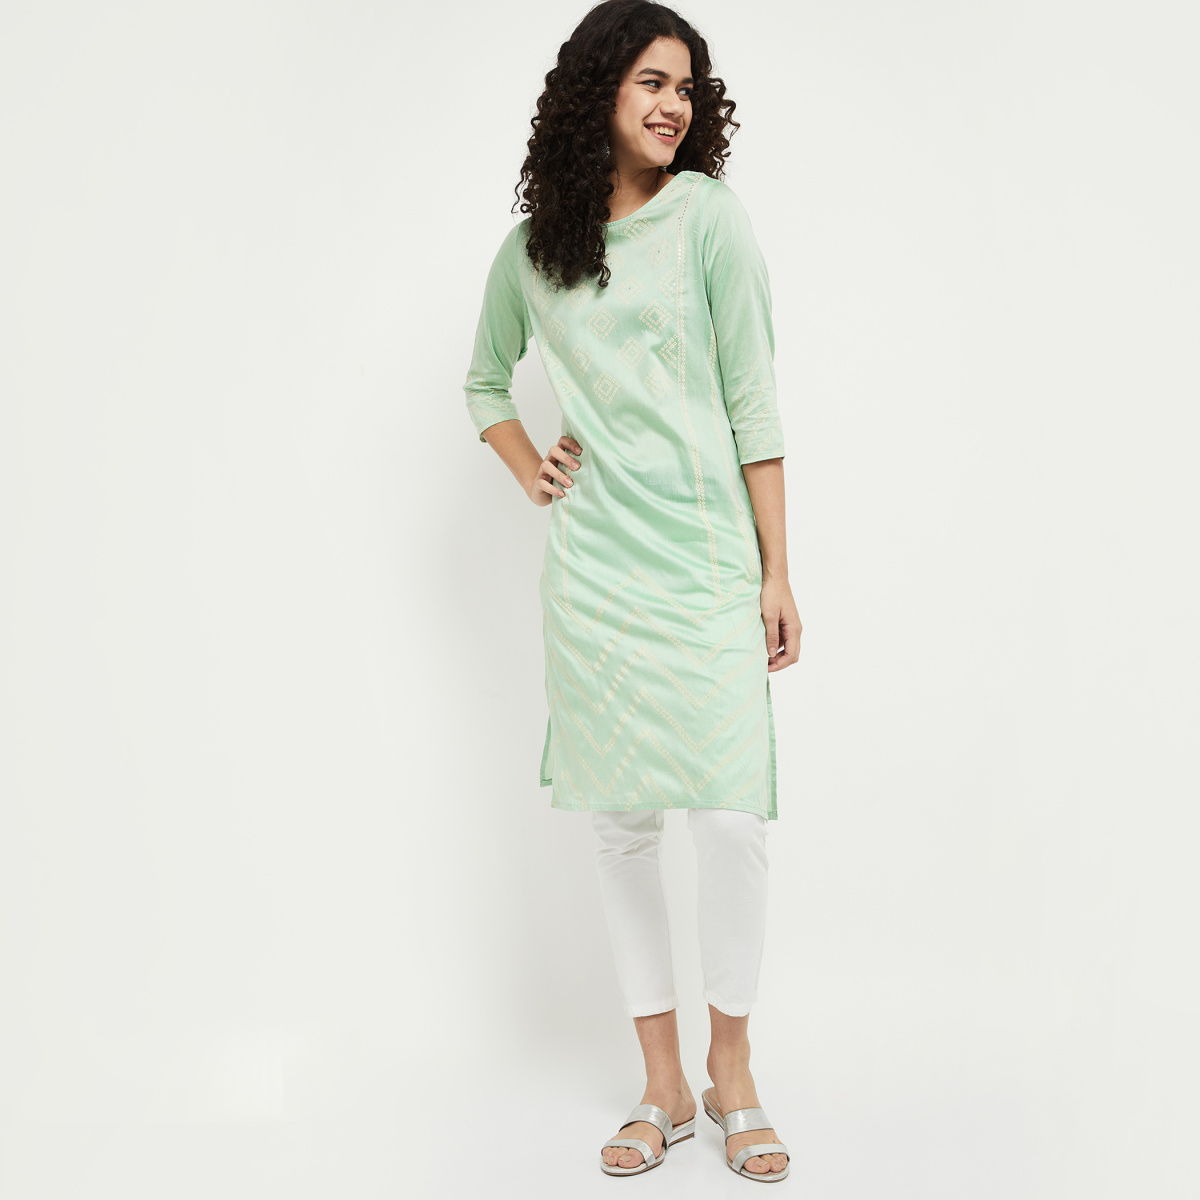 Women's Ethnic Wear | Fashion Fashion | kurta, fashion | Look your gorgeous  best this Onam in beautiful printed tiered kurtas from Max. Shop the look  starting at Rs. 349 from your